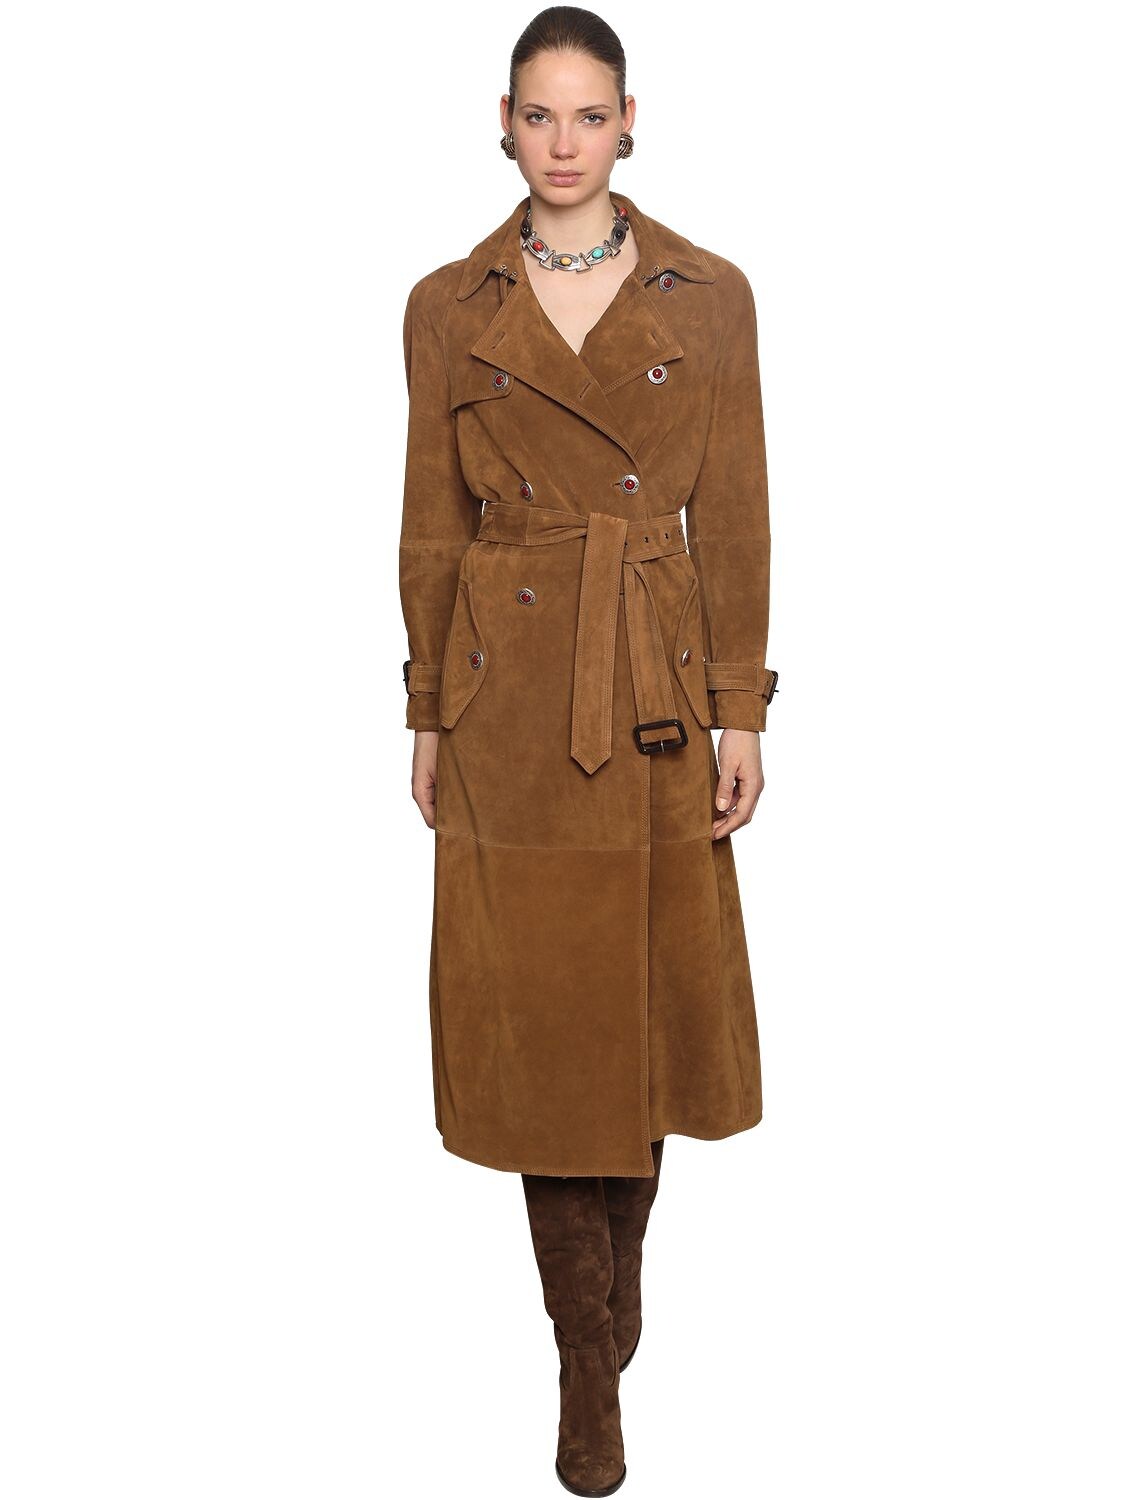 ETRO SUEDE TRENCH COAT W/ JEWELED BUTTONS,68IM9L027-ODAW0